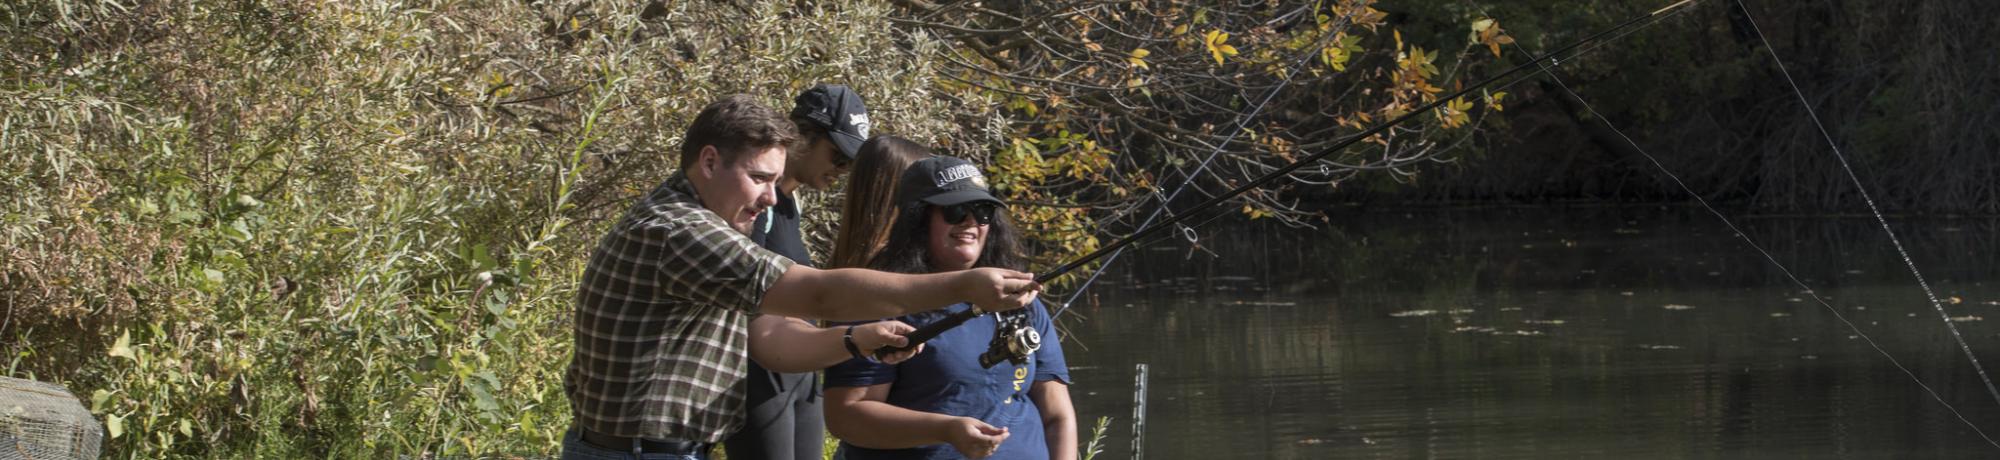 Image of students being taught how to fish at UC Davis Putah Creek Riparian Reserve.